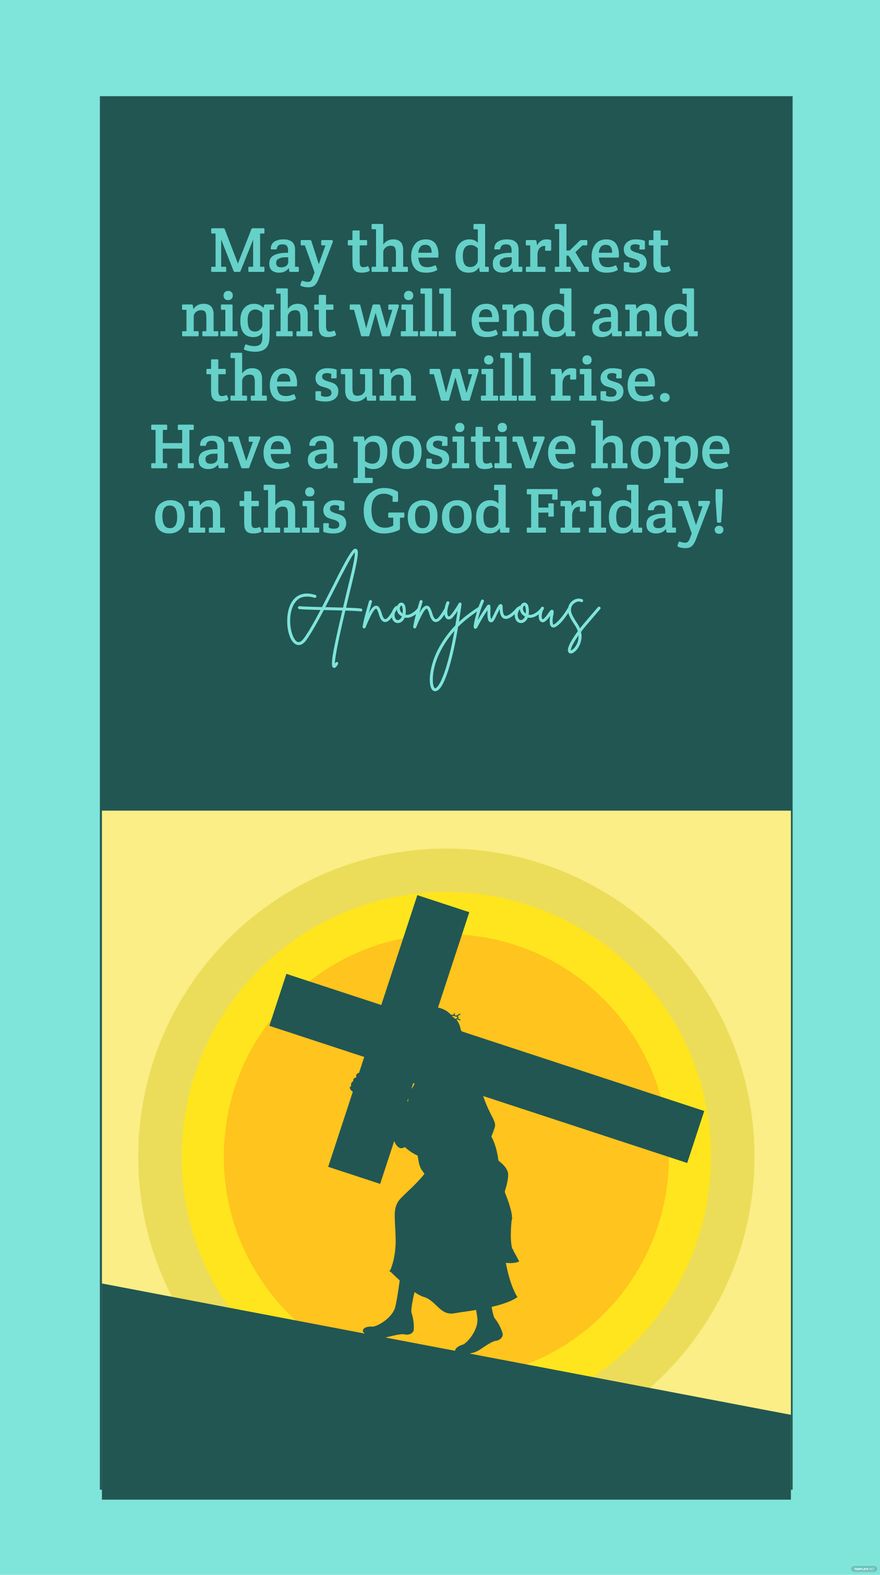 Anonymous - May the darkest night will end and the sun will rise. Have a positive hope on this Good Friday!